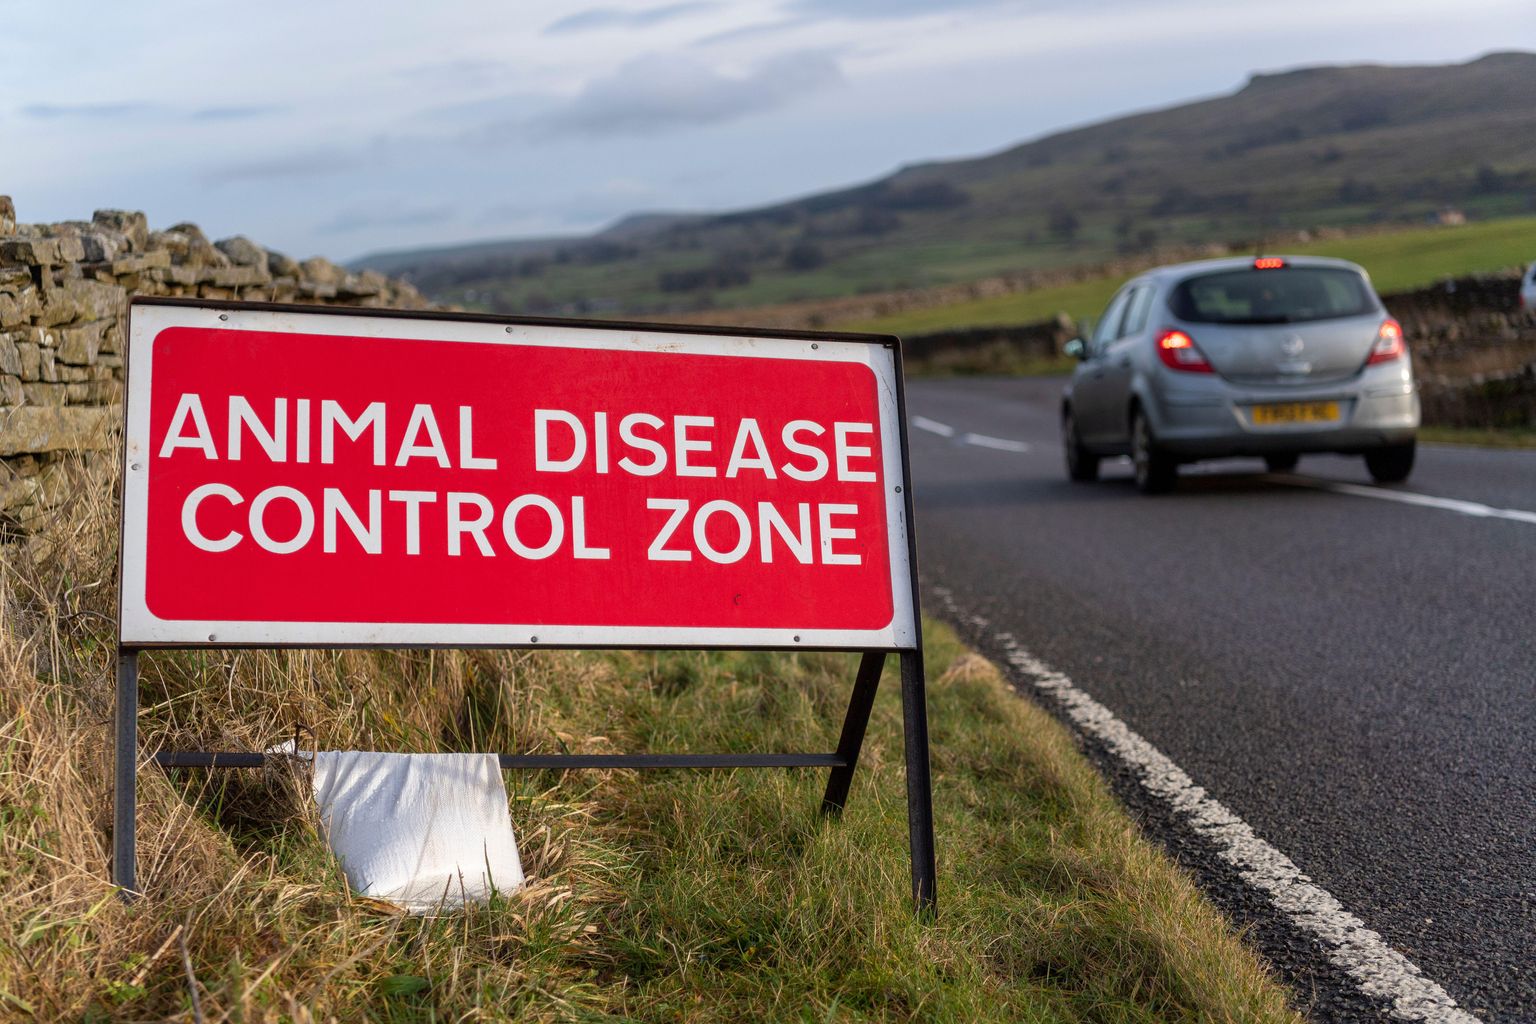 A control zone has been declared after bird flu has been detected near